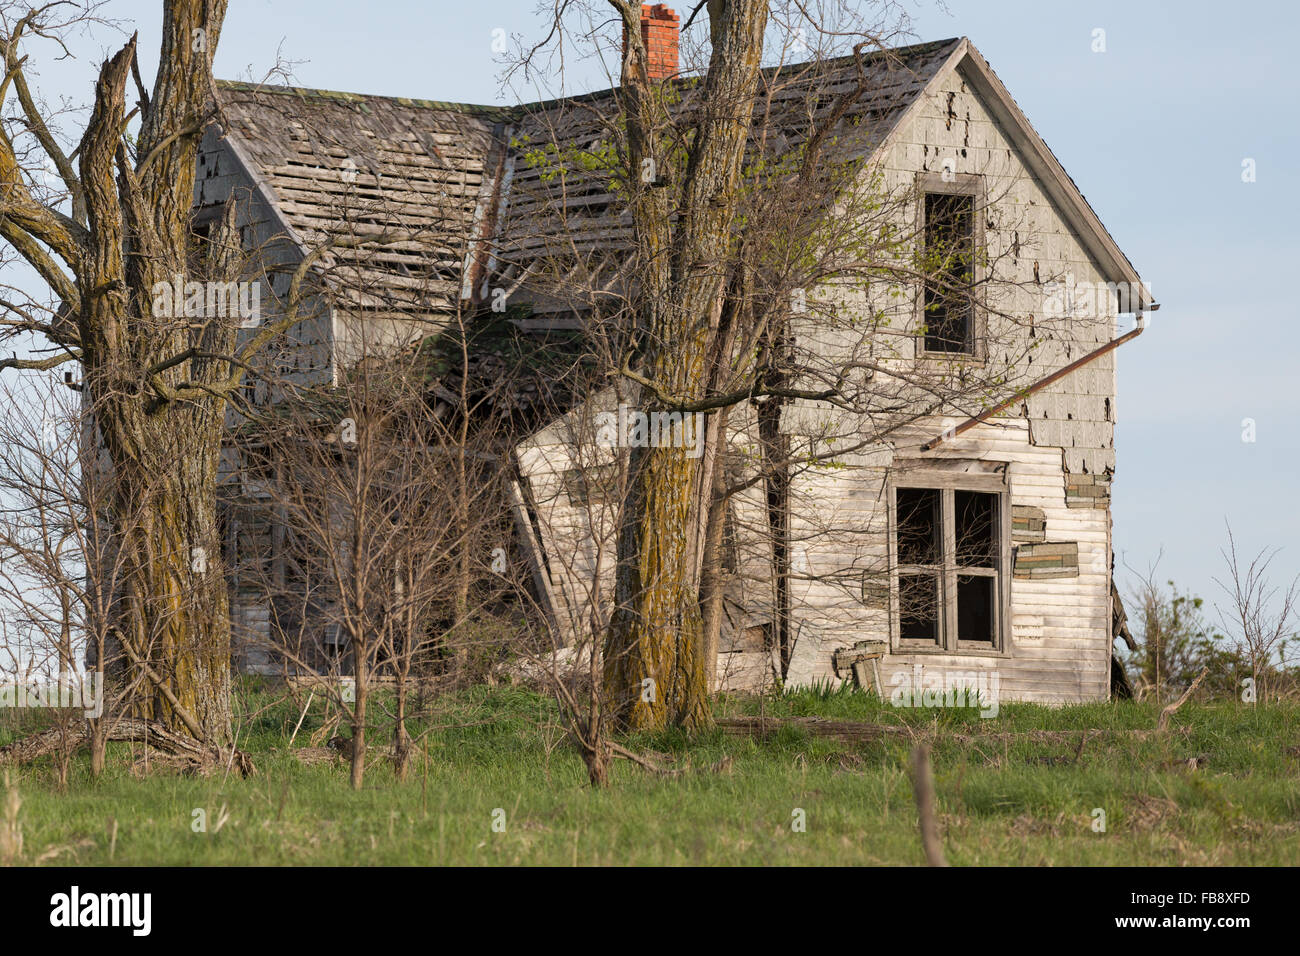 Old, abandoned and dilapidated farm house in rural Missouri Stock Photo